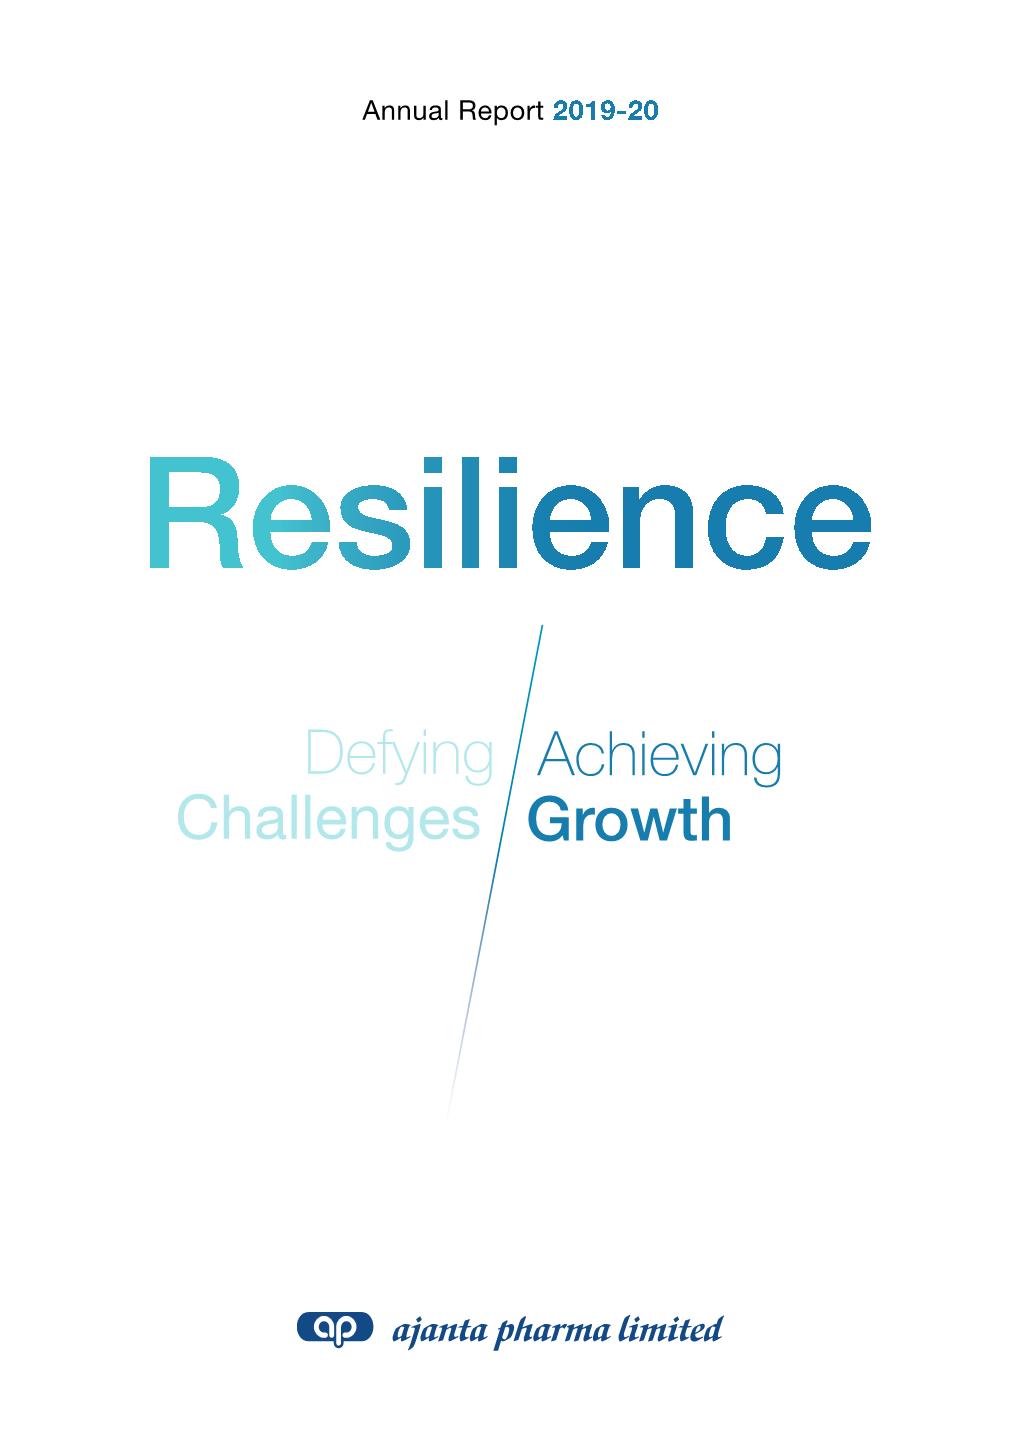 Defying Challenges Achieving Growth